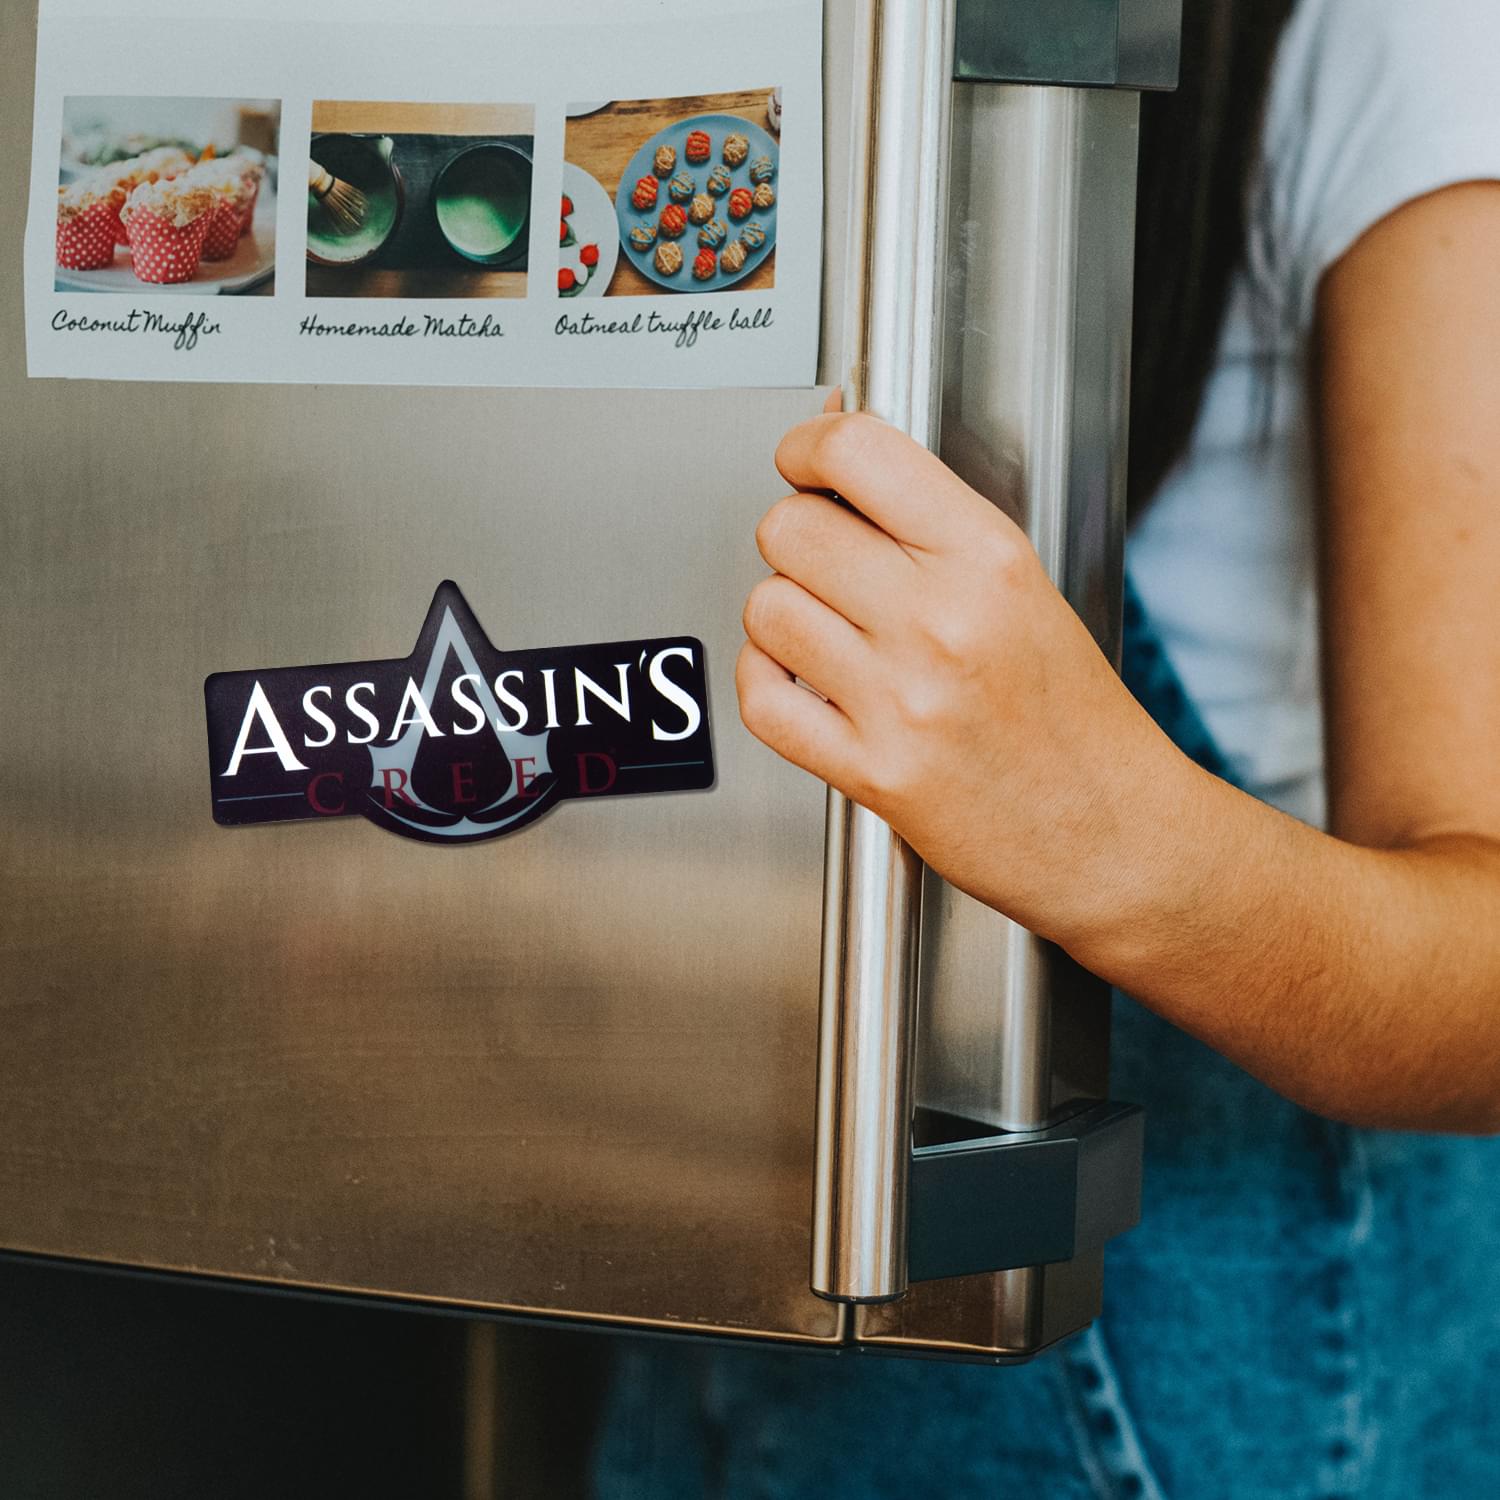 OFFICIAL Assassin's Creed Logo Magnet | Feat. The Assassin's Crest | 5.8" Wide